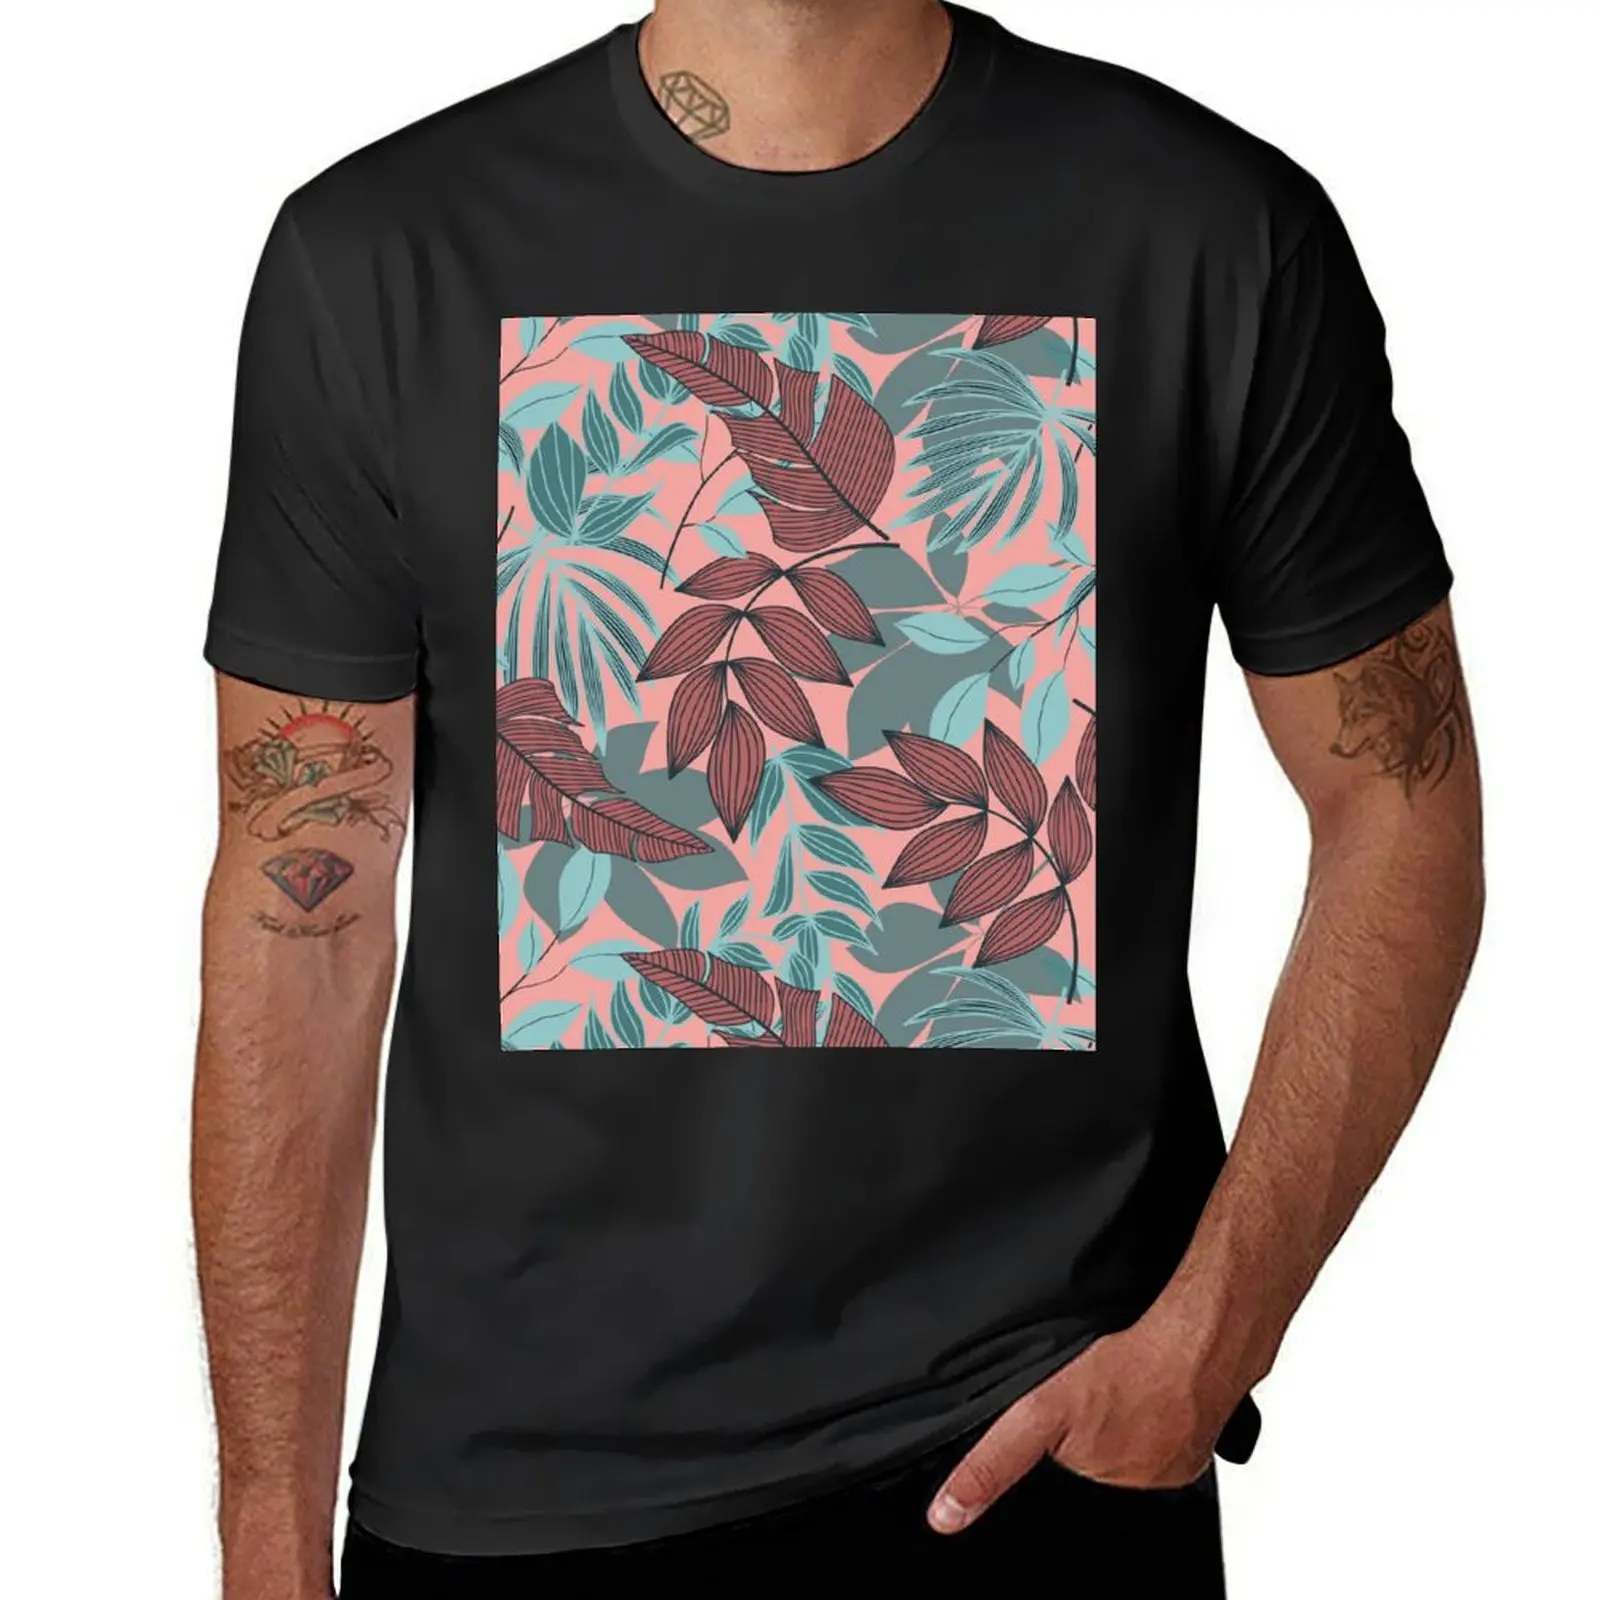 

Summer Floral Patterns : Get Ready for Summer with Stylish Floral Designs! T-shirt graphics mens graphic t-shirts hip hop